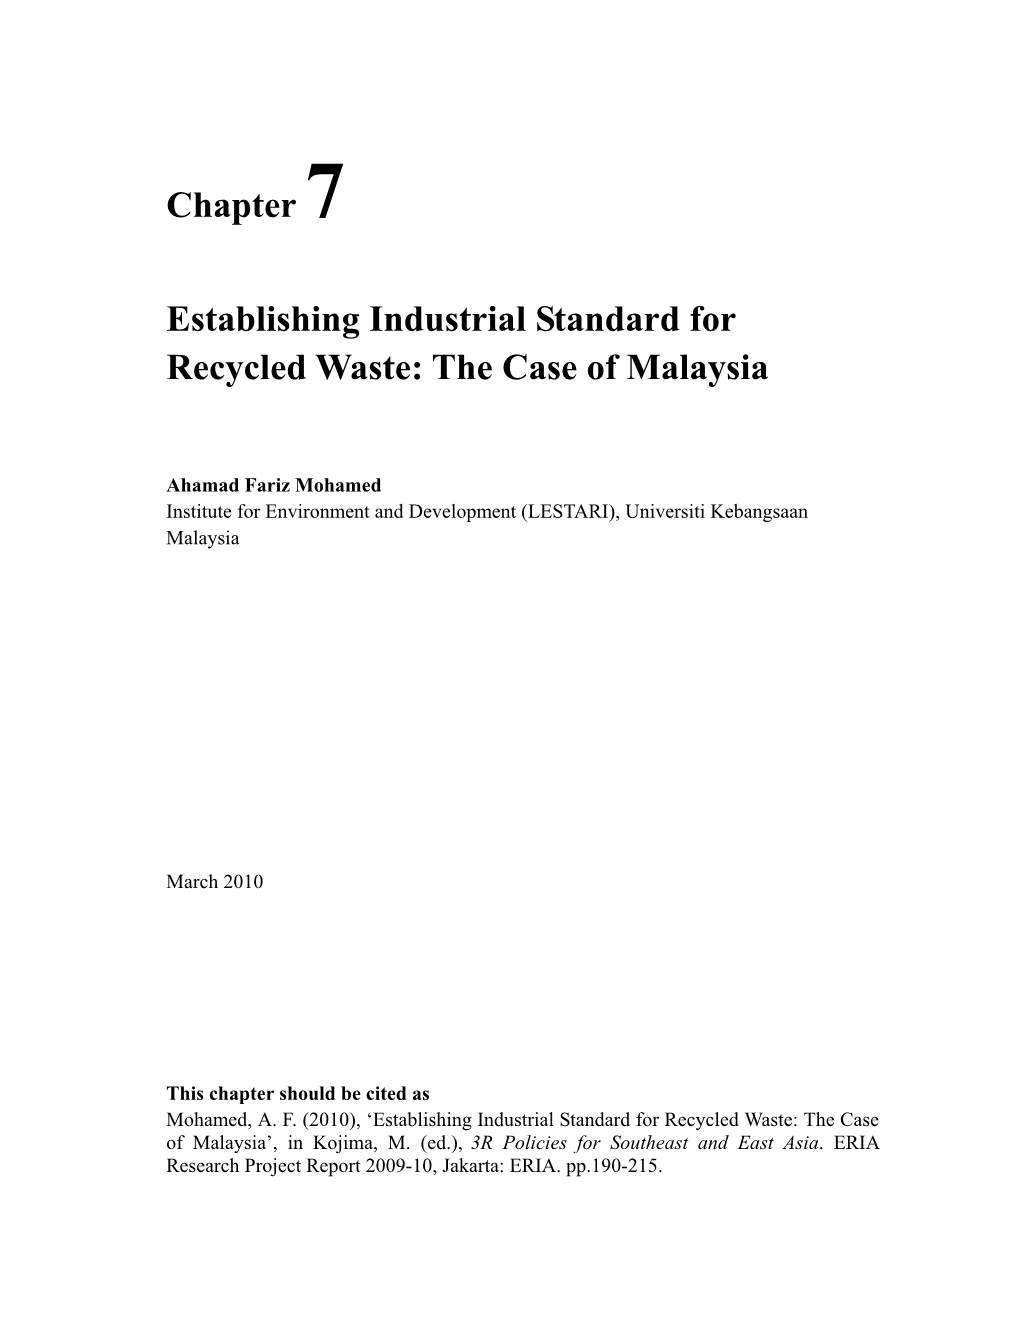 Chapter 7 Establishing Industrial Standard for Recycled Waste